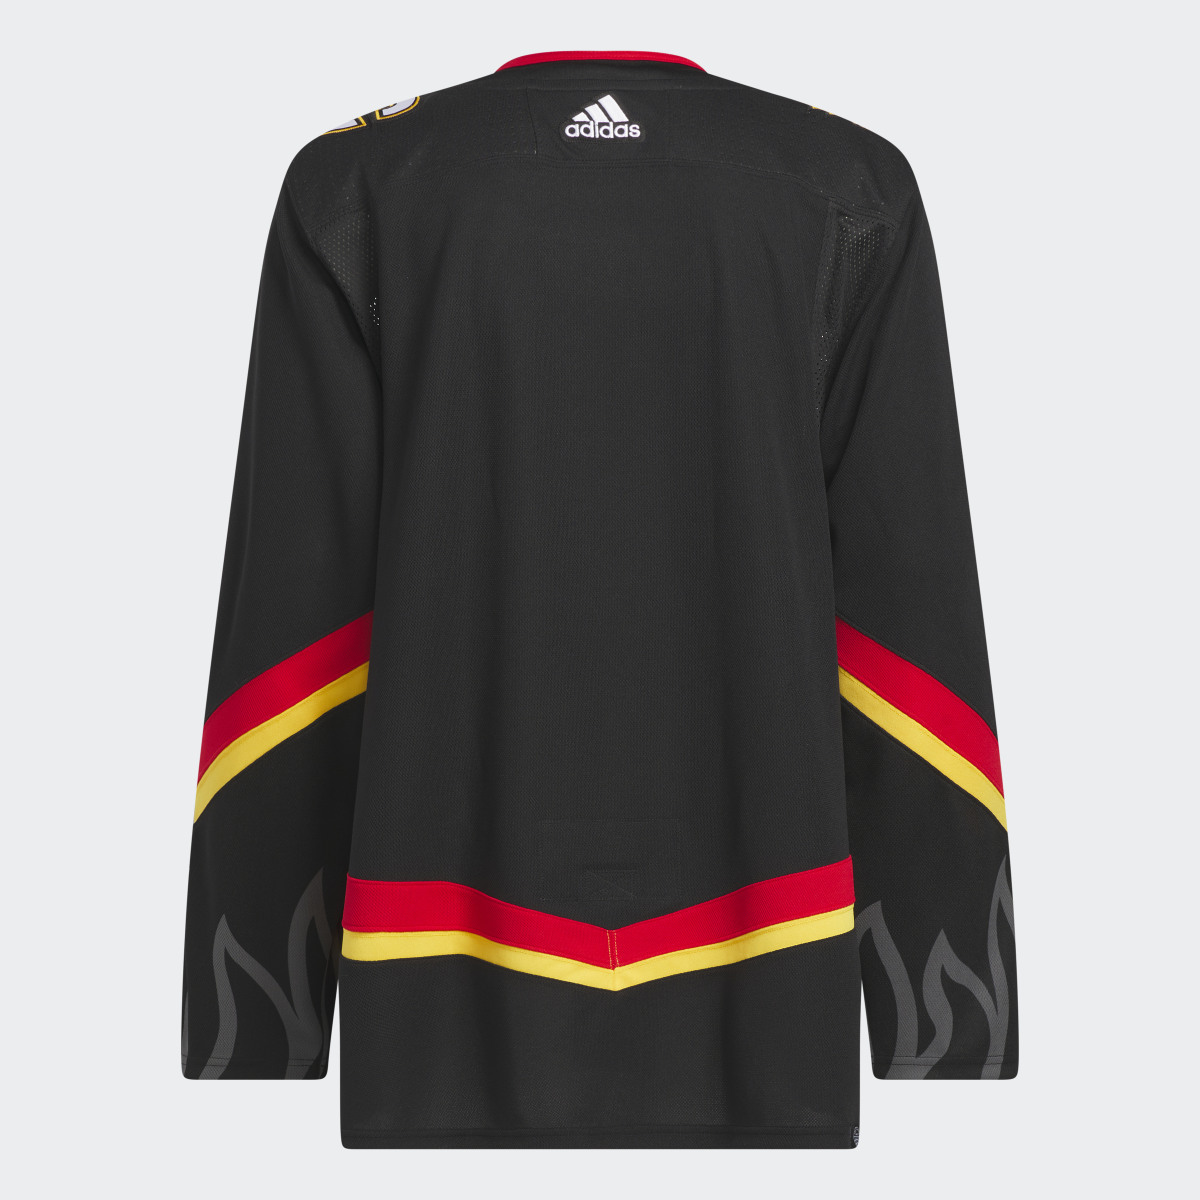 Adidas Flames Third Authentic Jersey. 6